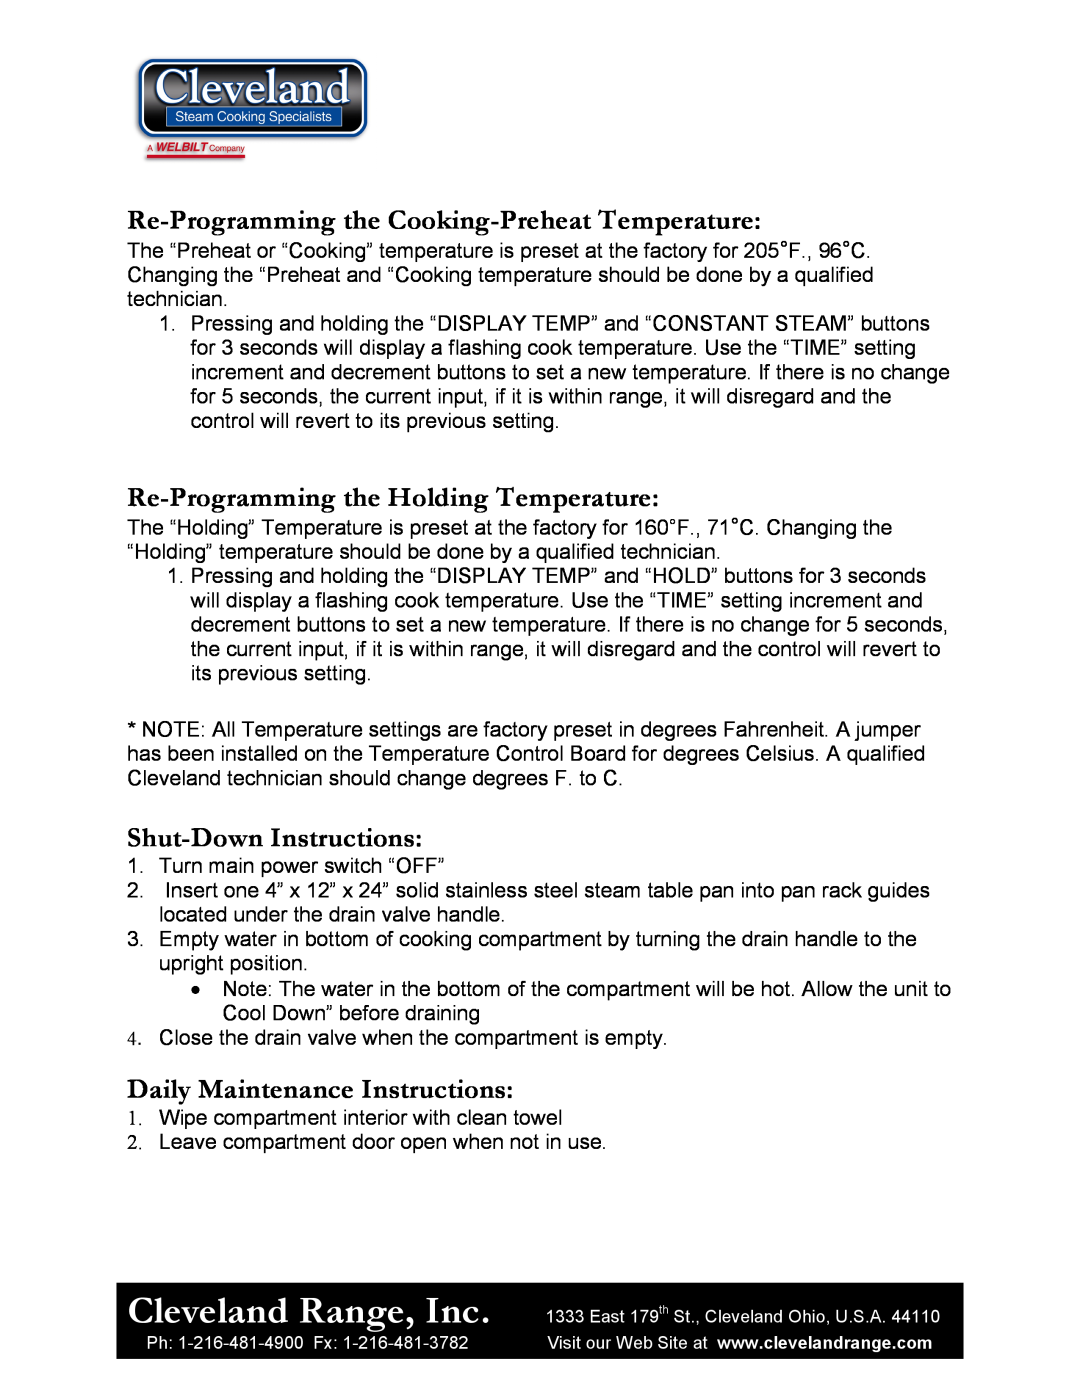 Cleveland Range 1SCE manual Cleveland Range, Inc, Re-Programming the Cooking-Preheat Temperature, Shut-Down Instructions 